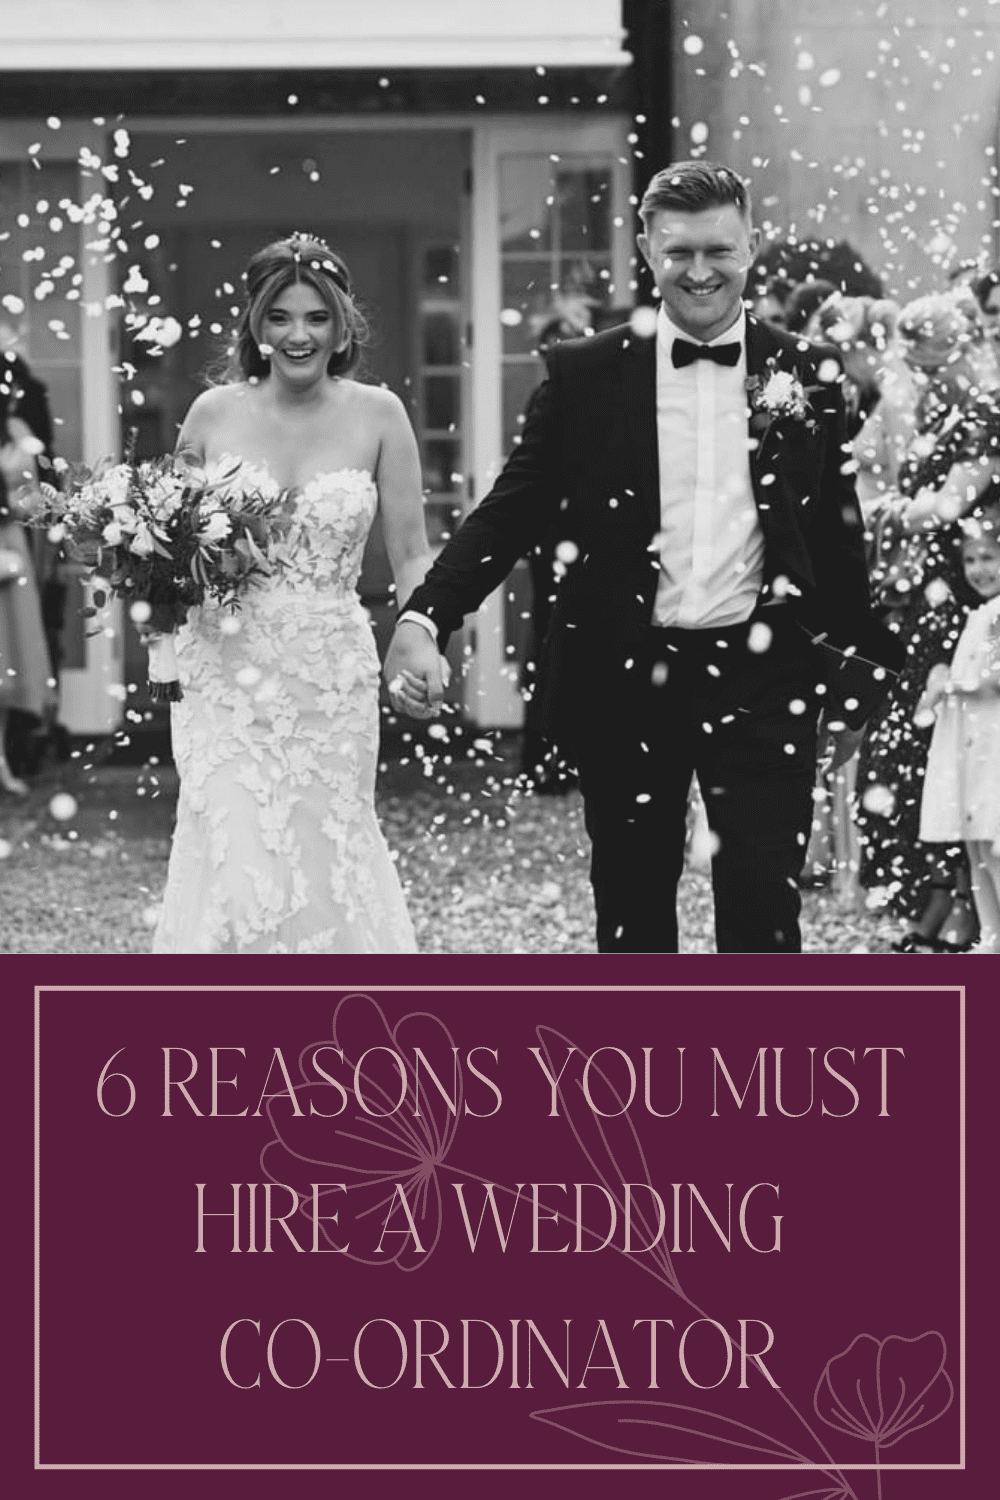 6 Reasons A Wedding Manager or Co-Ordinator Is Needed